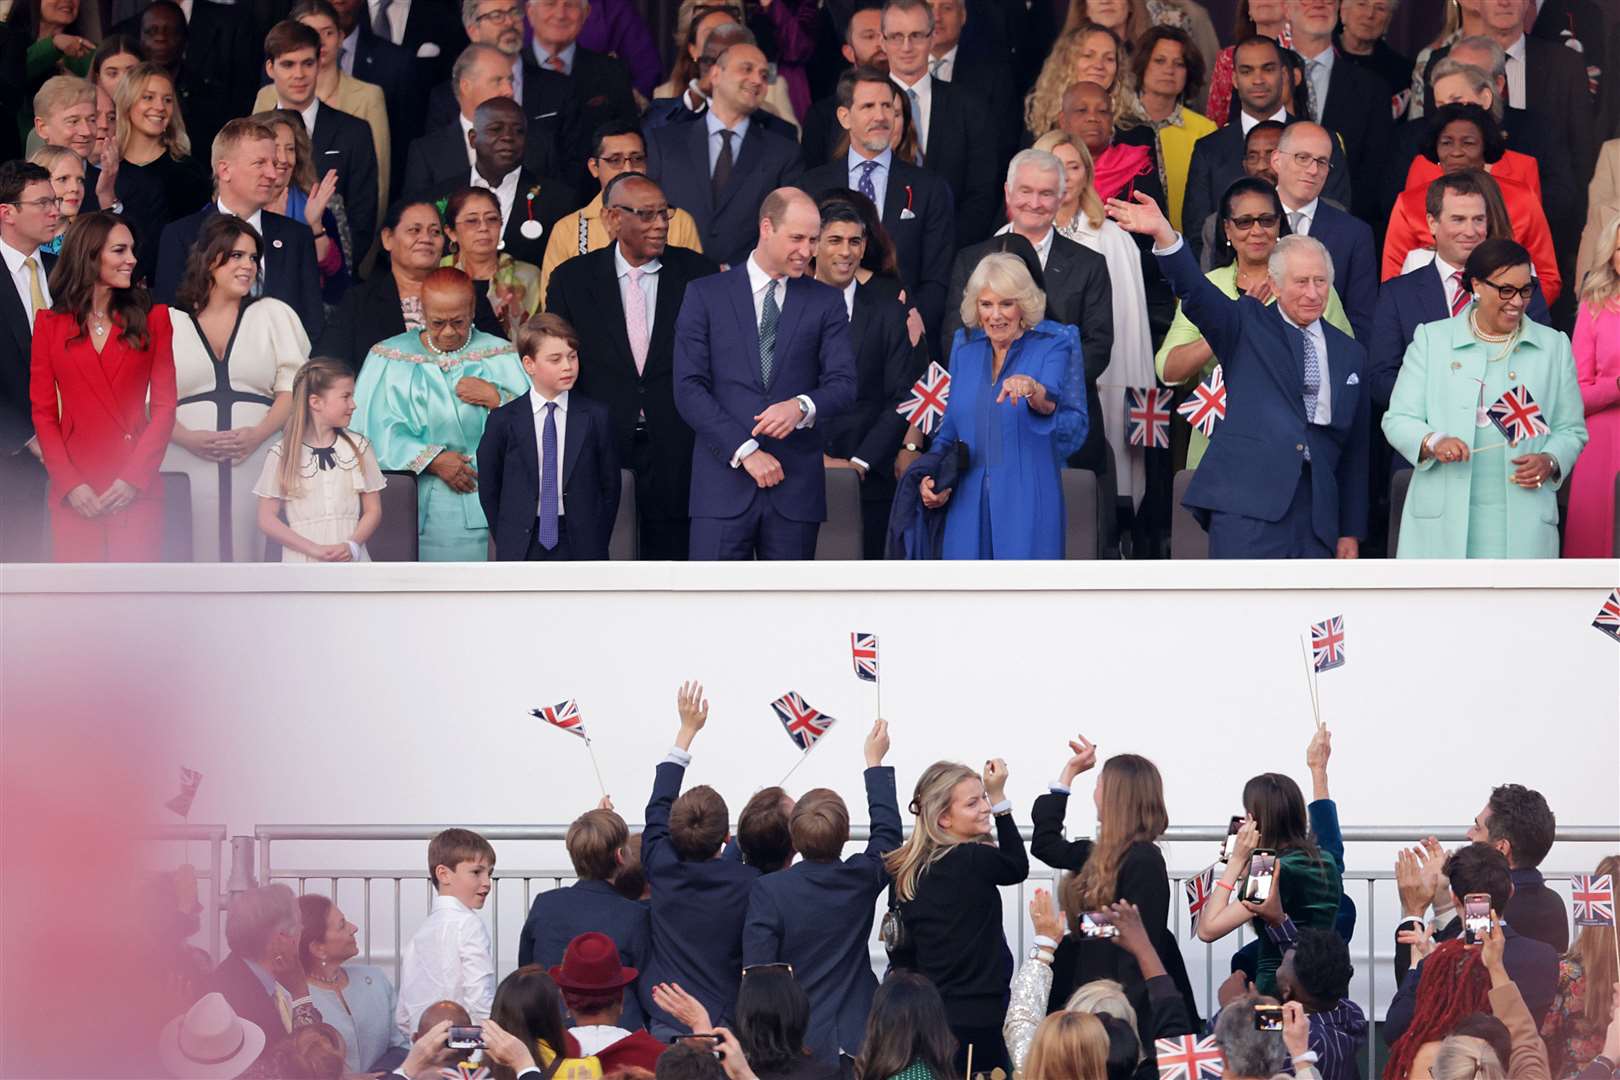 Charles and Camilla were joined by other members of the royal family at the celebration (Chris Jackson/PA)